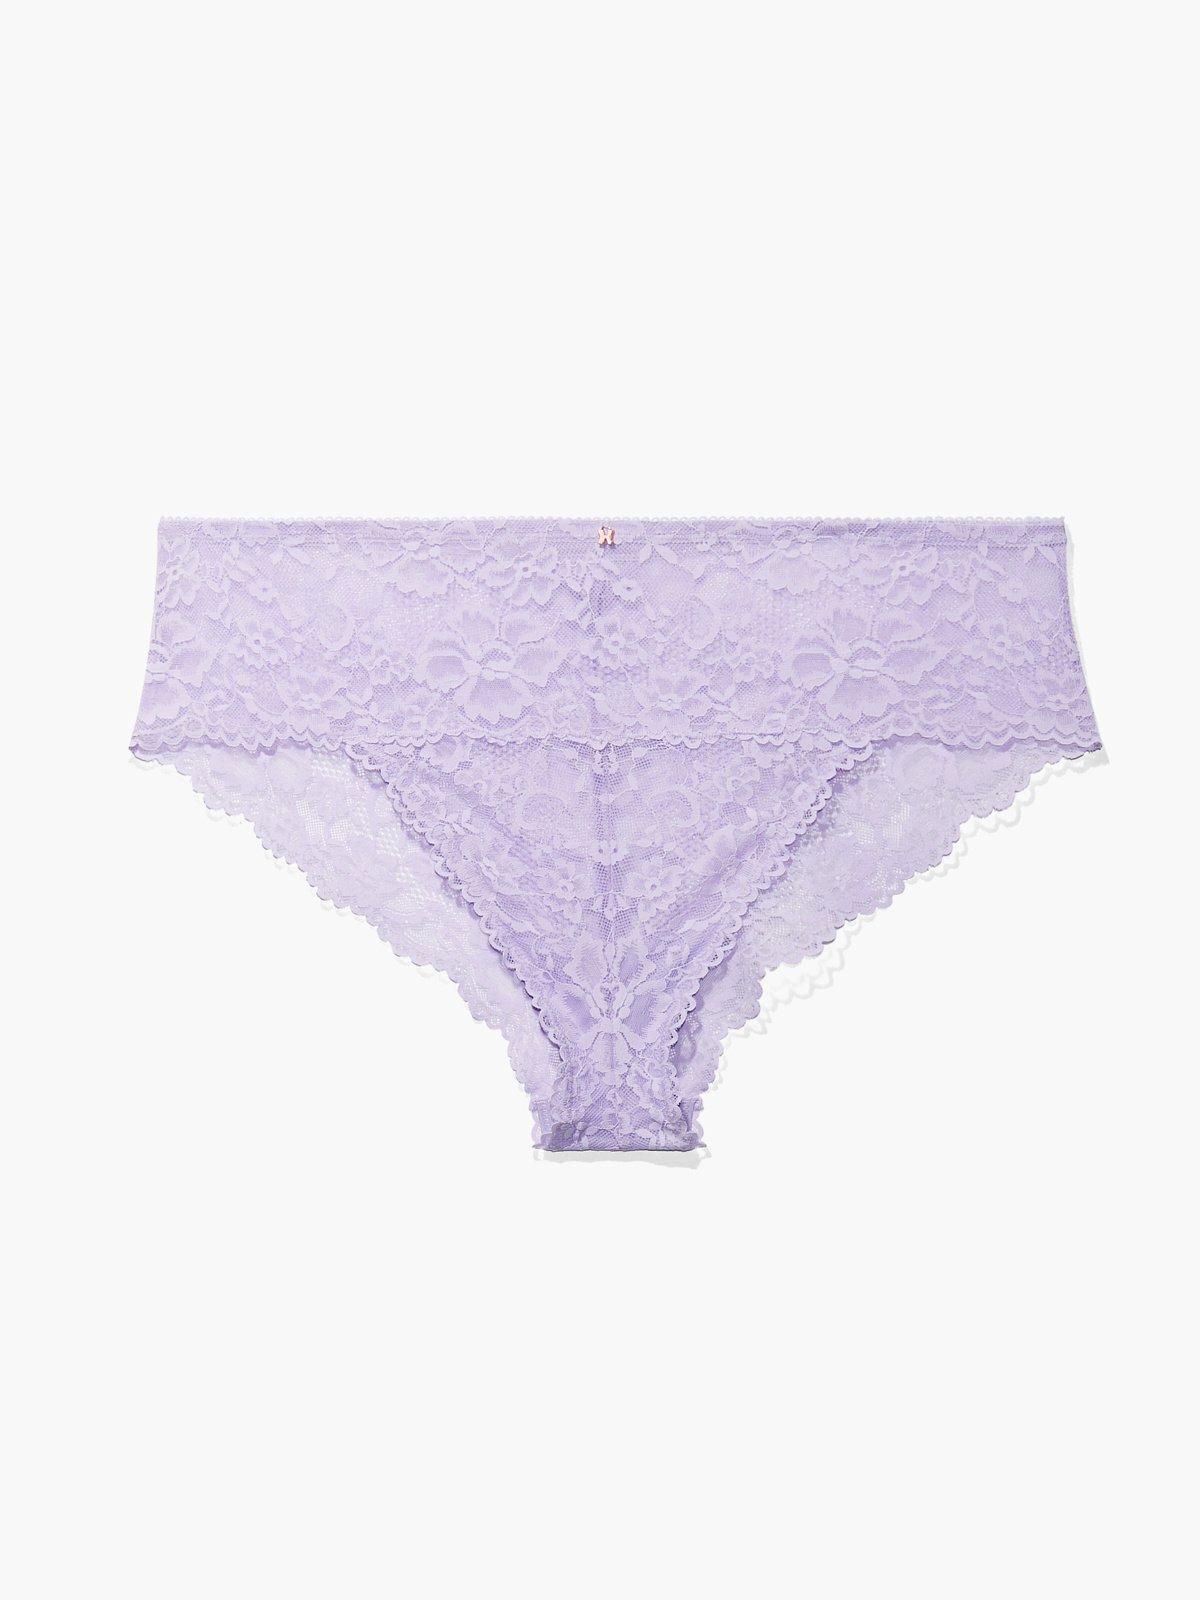 Women's Sexy Pink Floral Lace Cheeky Panty Underwear Intimates